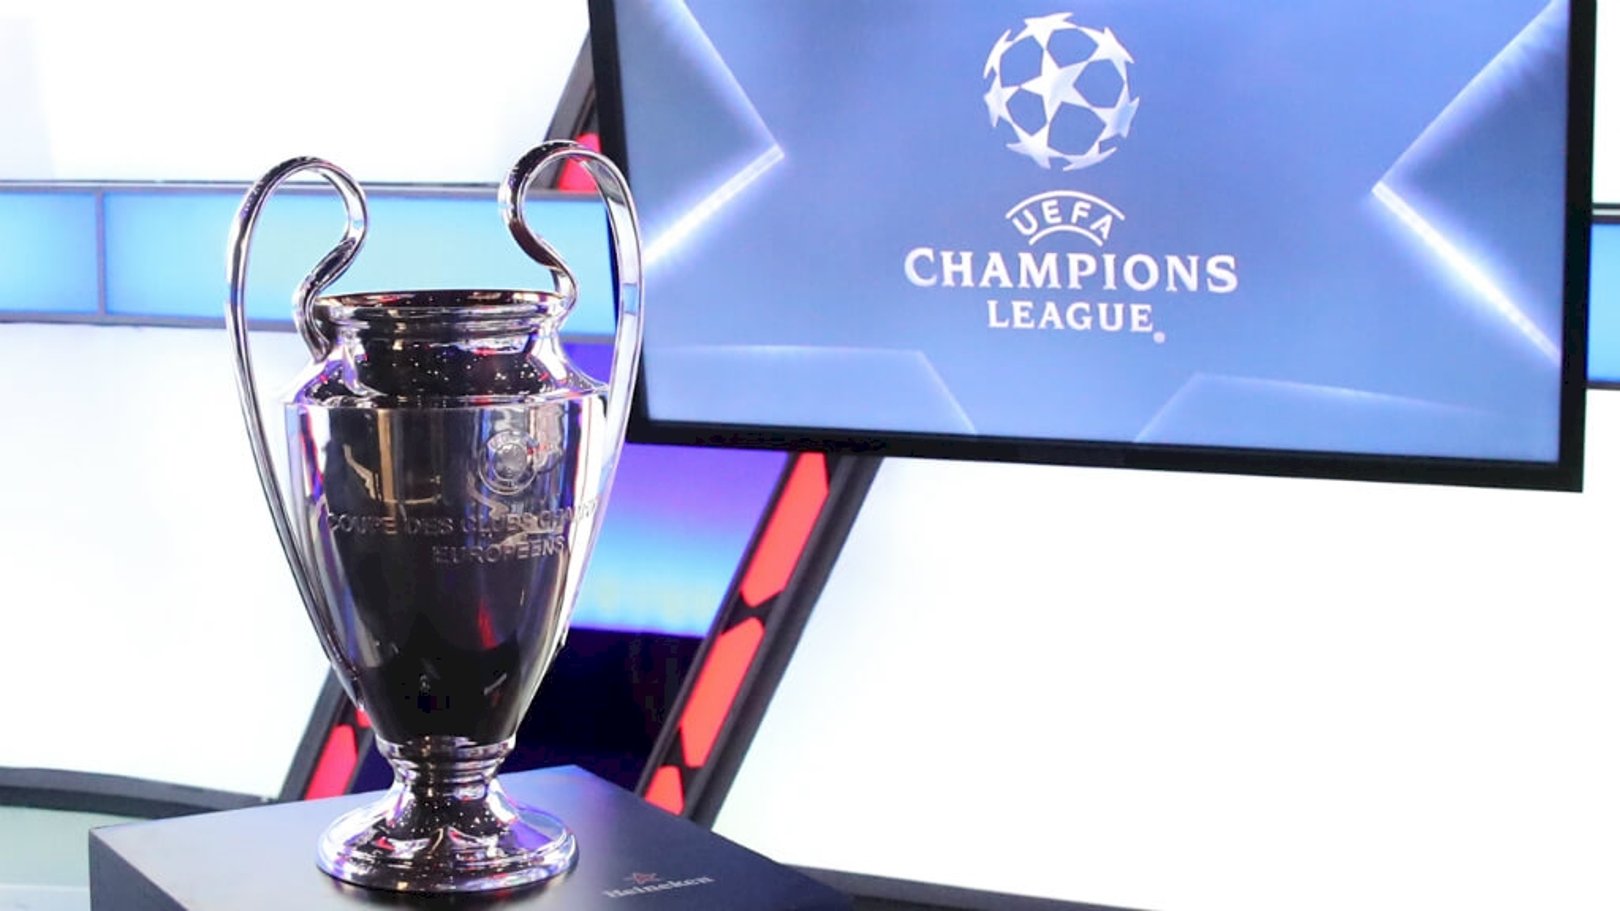 LIVE UPDATES: UEFA Champions League 2018/19 group stage draw